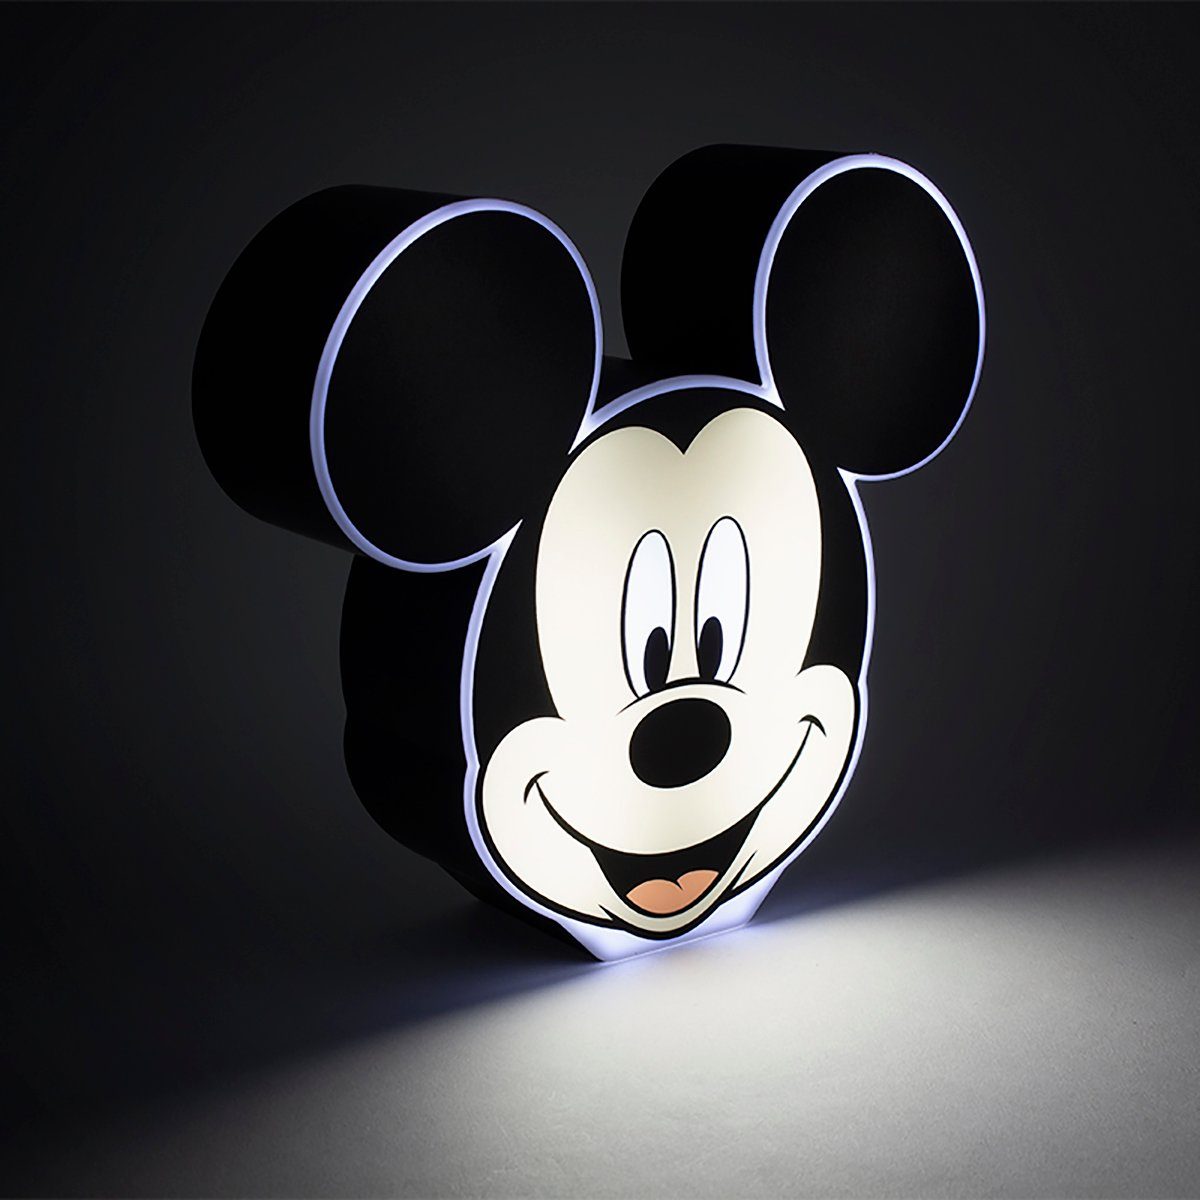 Mickey Leuchte Disney Mouse Paladone Stehlampe